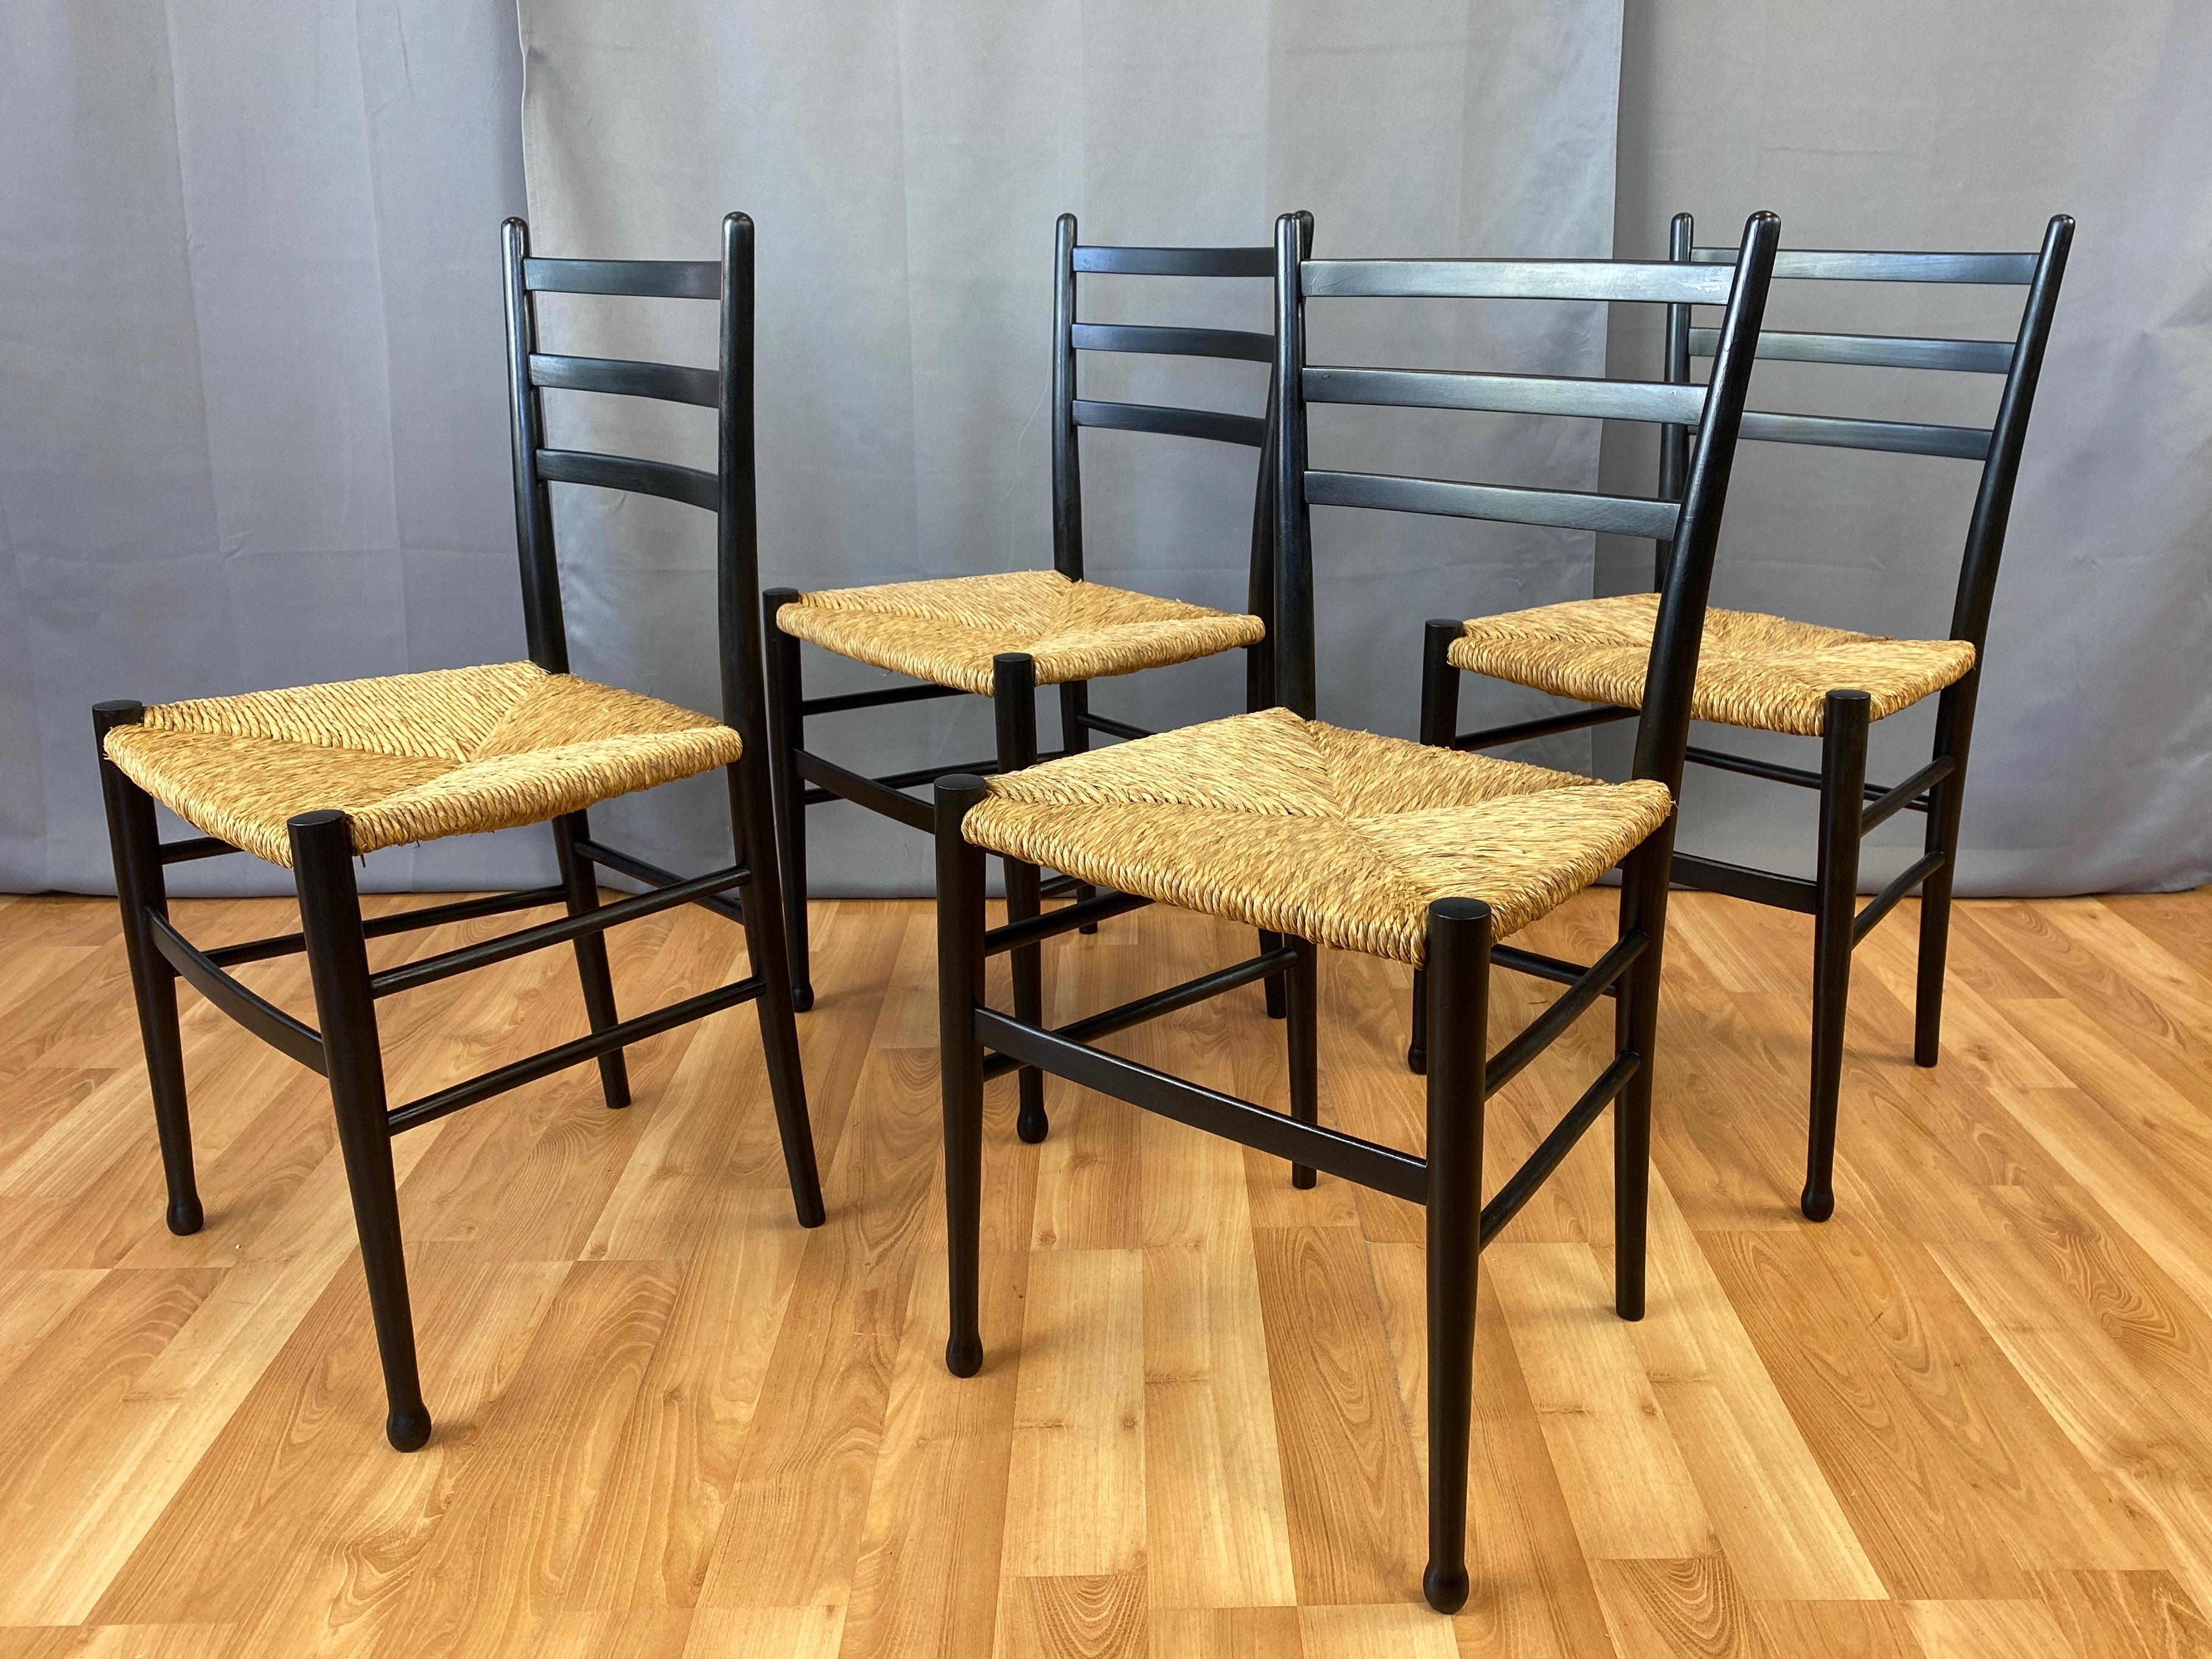 A very handsome set of four late 1960s Italian ebonized wood ladder back side or dining chairs with woven rush seats, similar to iconic designs by Gio Ponti.

Spry frame with slightly splayed three-slat back, and notable for front legs with a